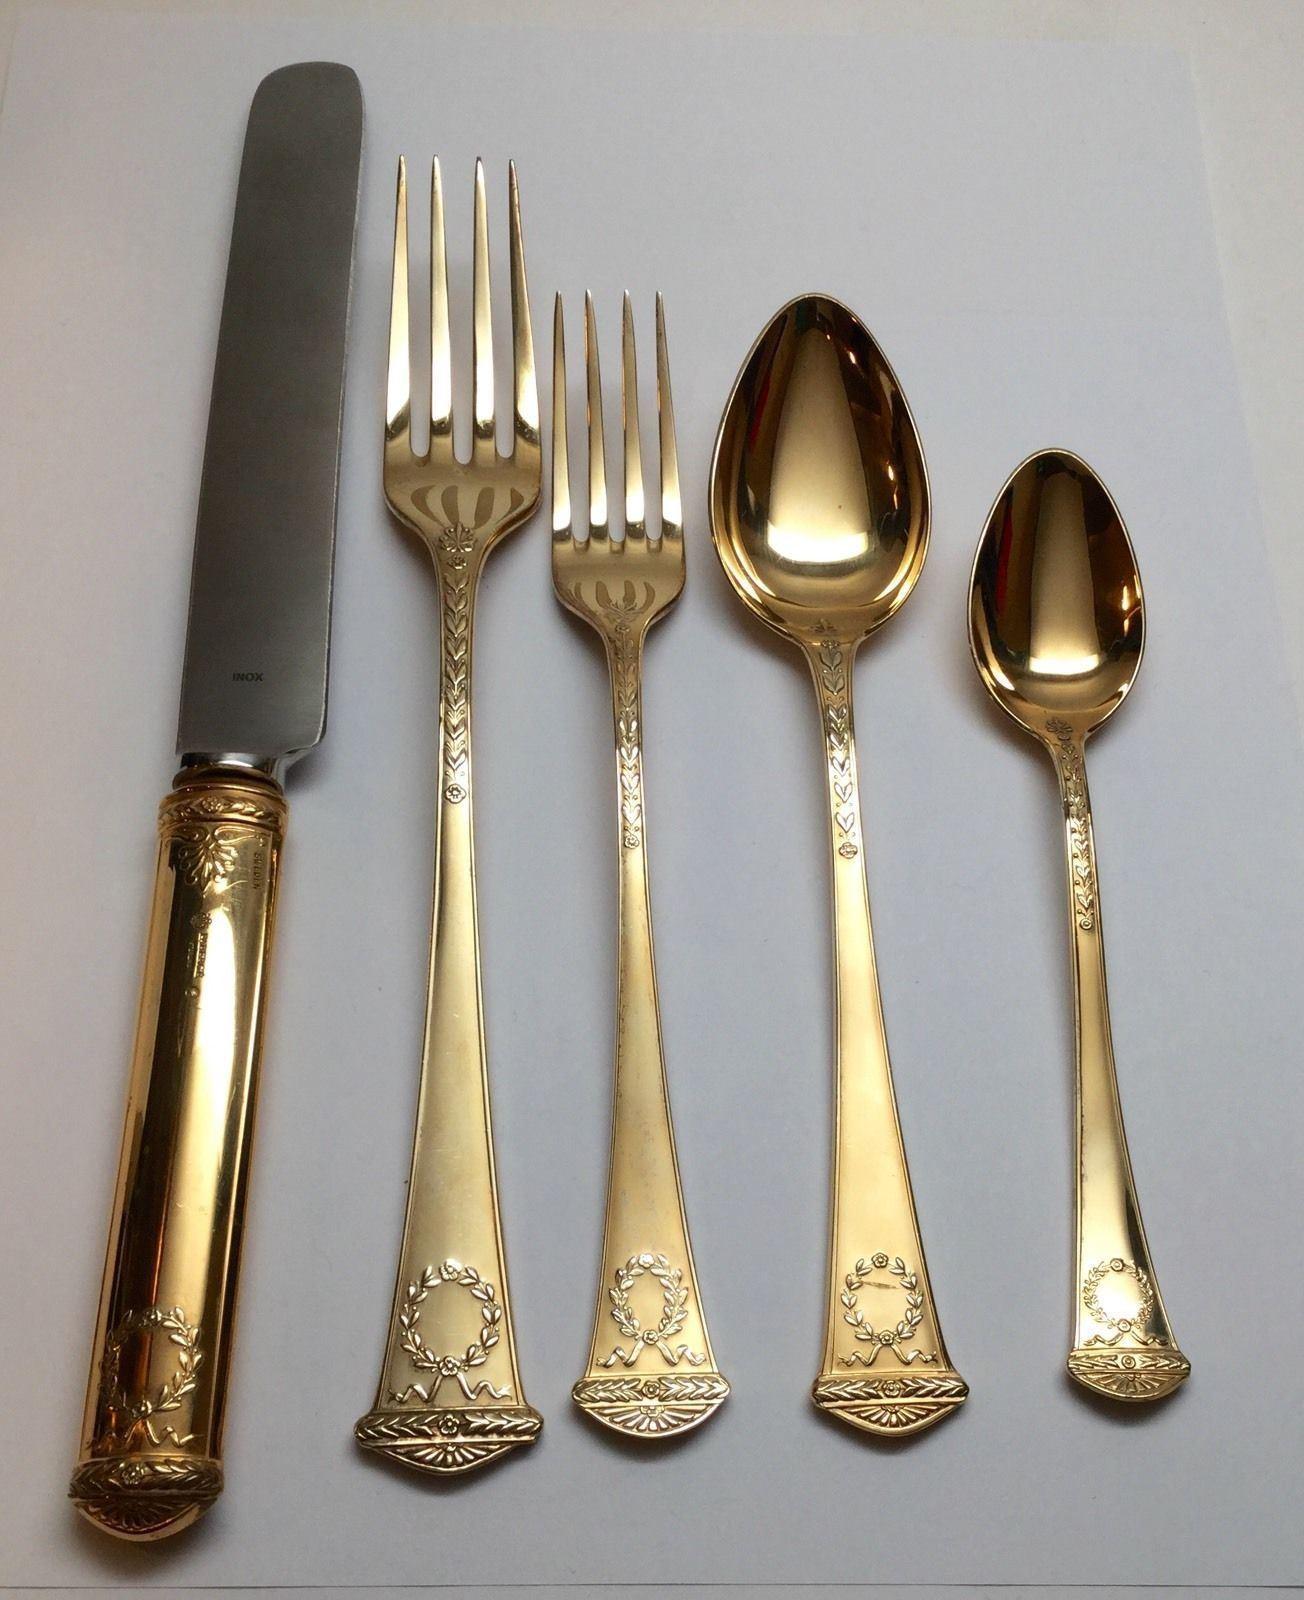 Faberge sterling silver vermeil 5-piece place setting in the imperial court pattern. 
Marked: Faberge hallmarks, FABERGE STERLING. 
No monogram. 
Measures: Dinner knife 10 1/4